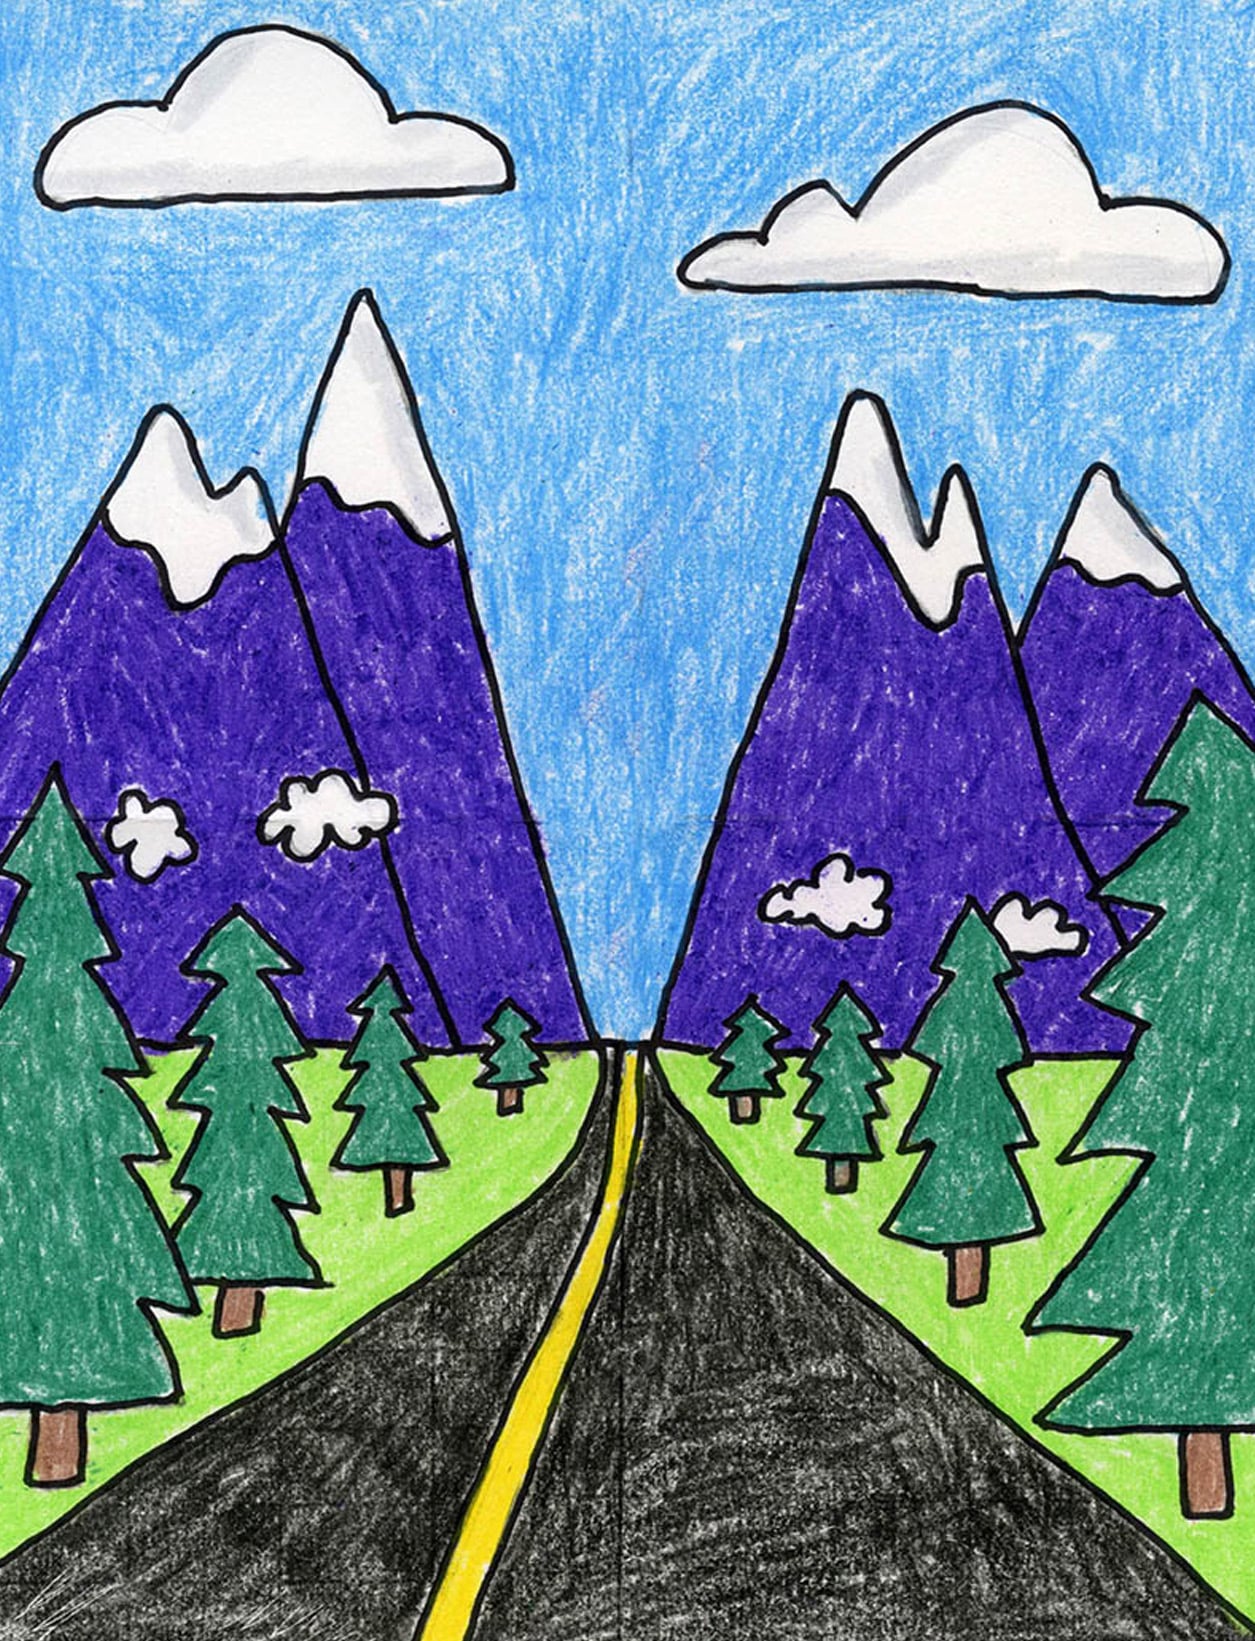 Amazon.com: Easy Scenery Drawing Coloring Book For Kids: 120 Pages Easy Scenery  Drawing Coloring Book For Kids For Kids And Adults Relaxation And Stress  Relief, ... Beautiful Interior, Book For Kids Ages